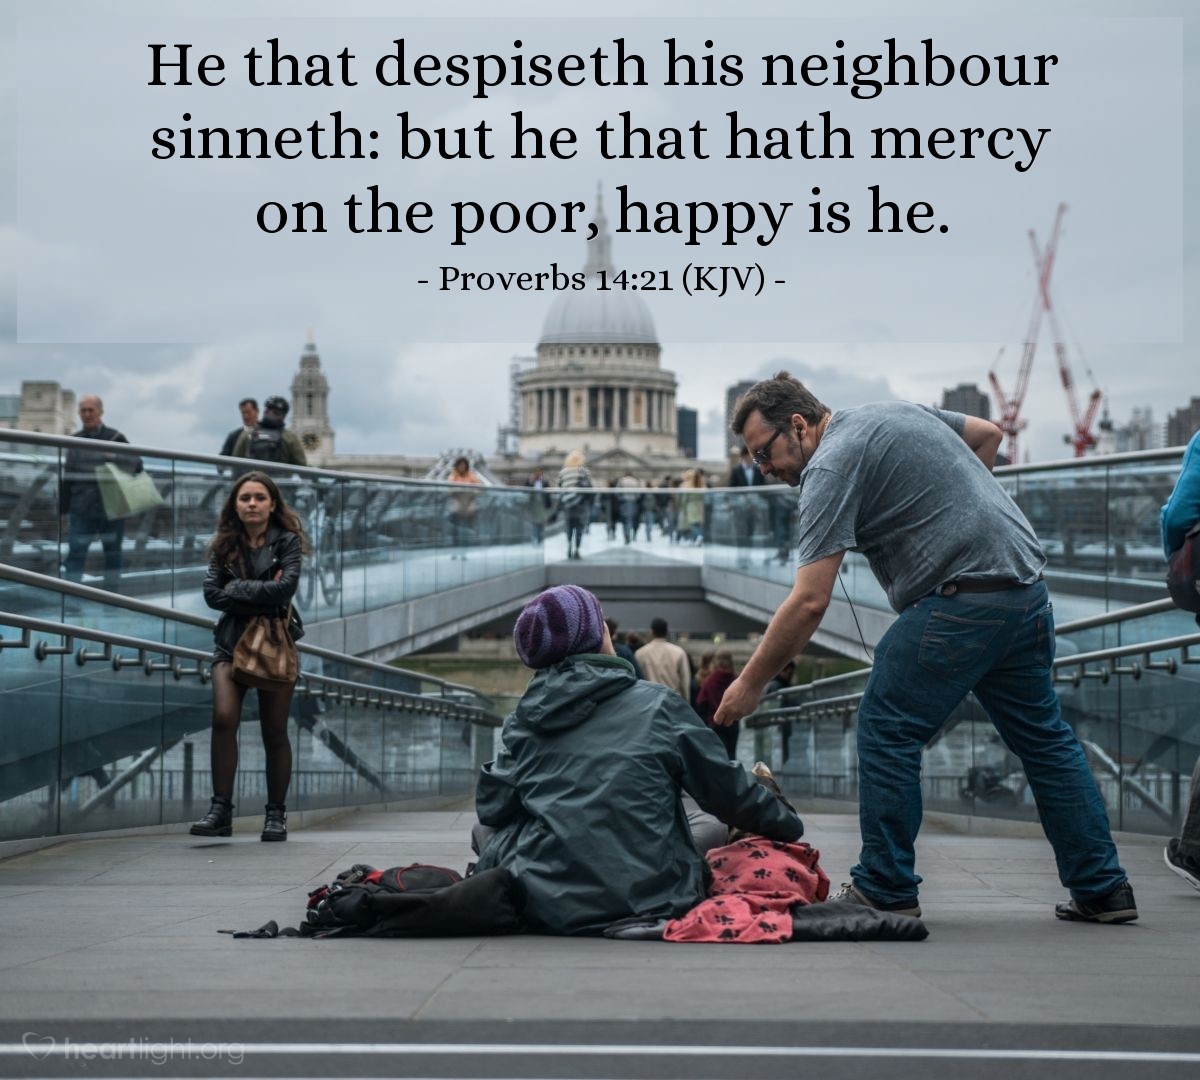 Illustration of Proverbs 14:21 (KJV) — He that despiseth his neighbour sinneth: but he that hath mercy on the poor, happy is he.